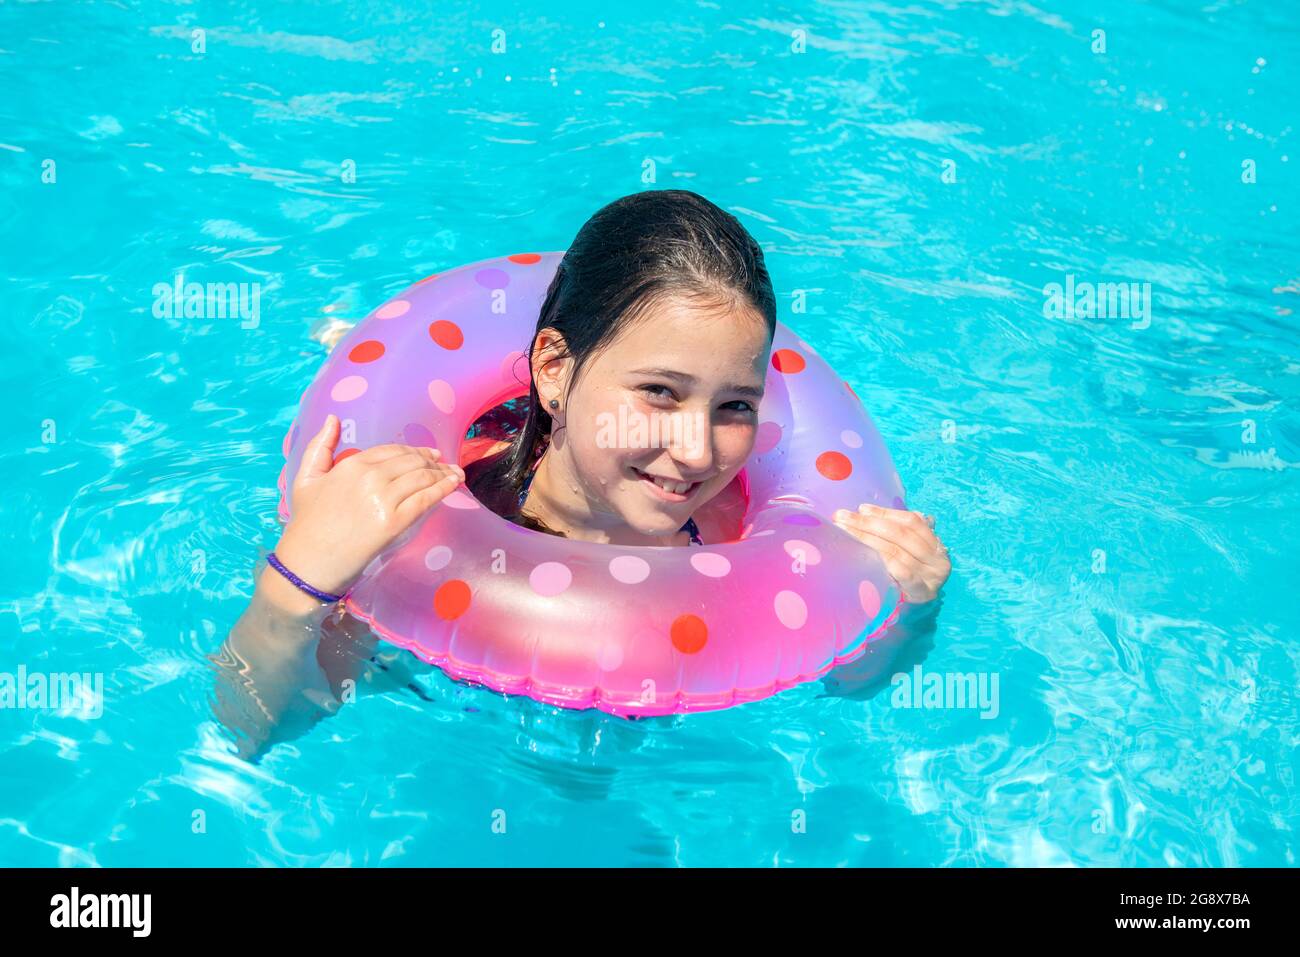 Beautiful young girl in a pool smilling Stock Photo